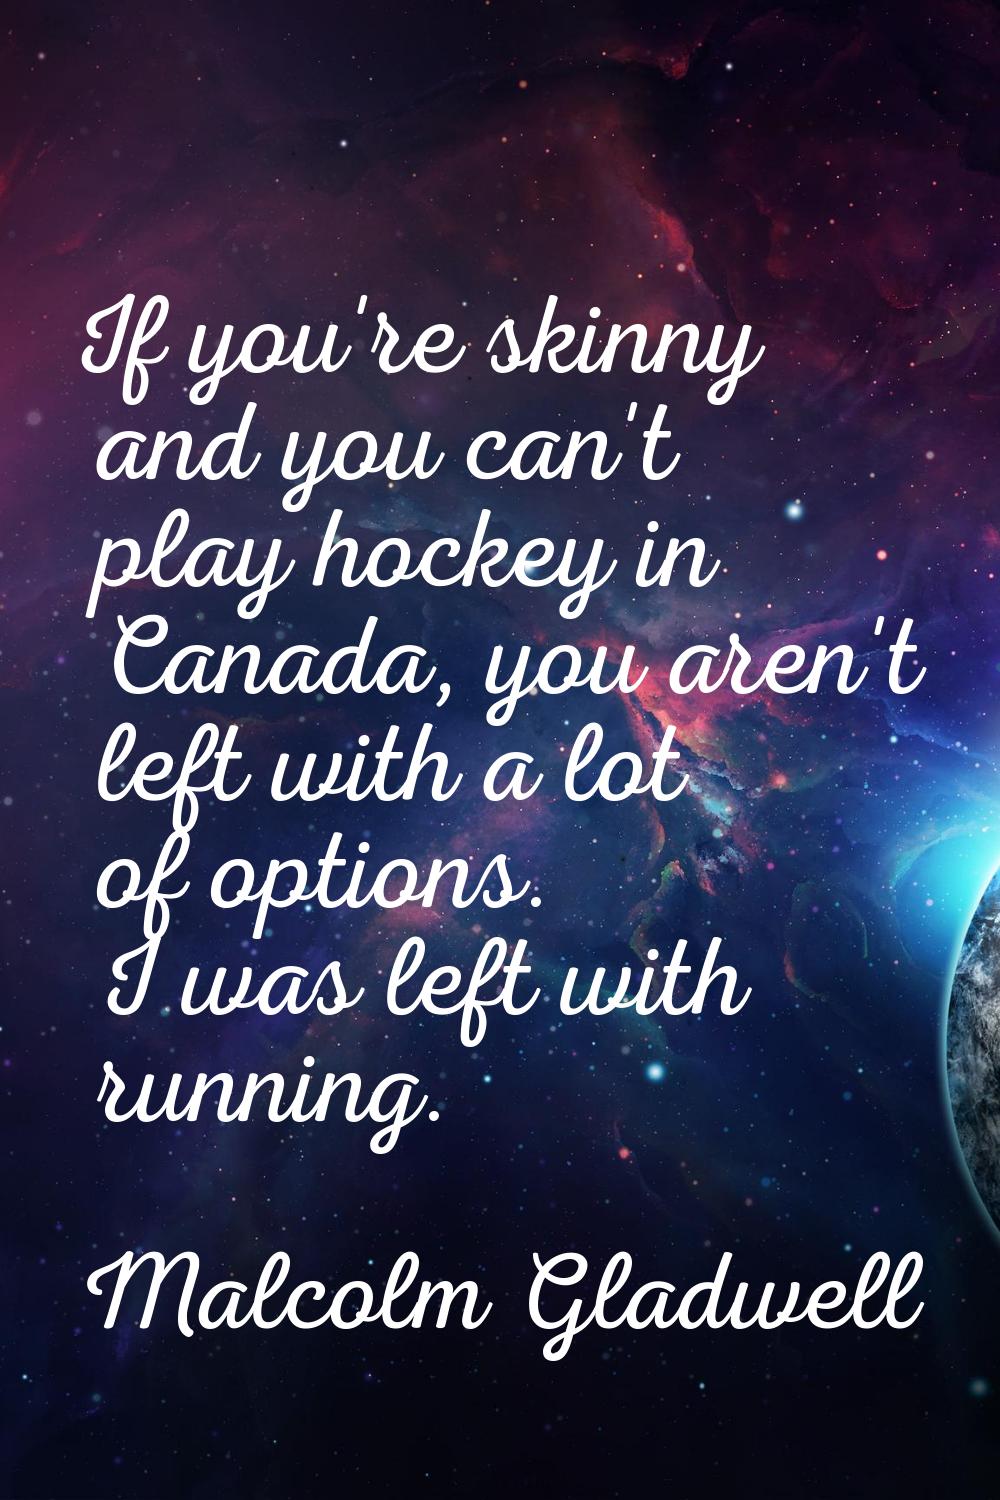 If you're skinny and you can't play hockey in Canada, you aren't left with a lot of options. I was 